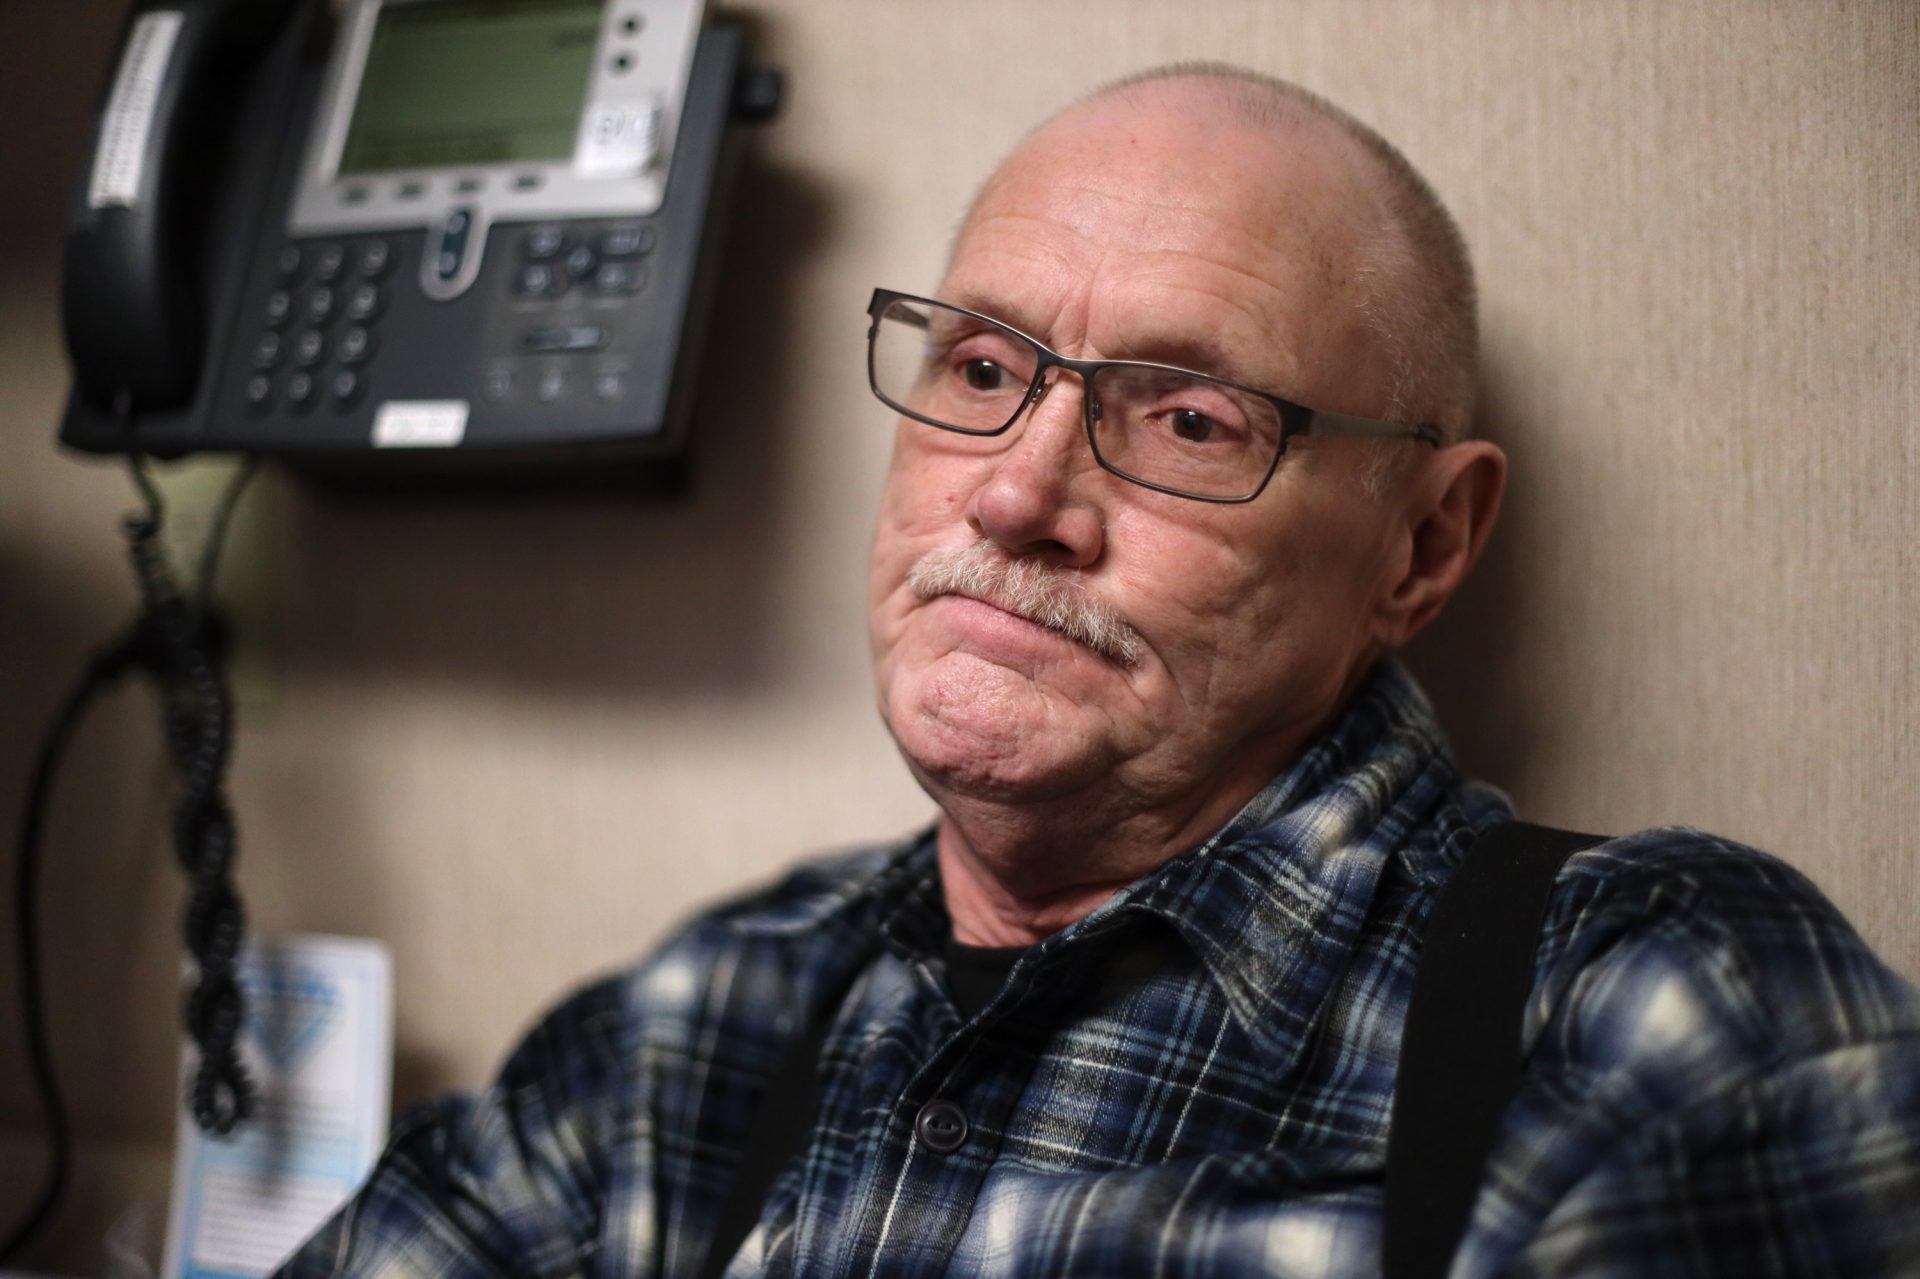 Michael Kruchten, 62, a patient of Dr. Angela Gatzke-Plamann, takes prescription opioids for chronic pain. "Dr. Gatzke has been a big plus and incentive for me ... She's one of the main factors why I'm still here. She pulled me through it," he says.